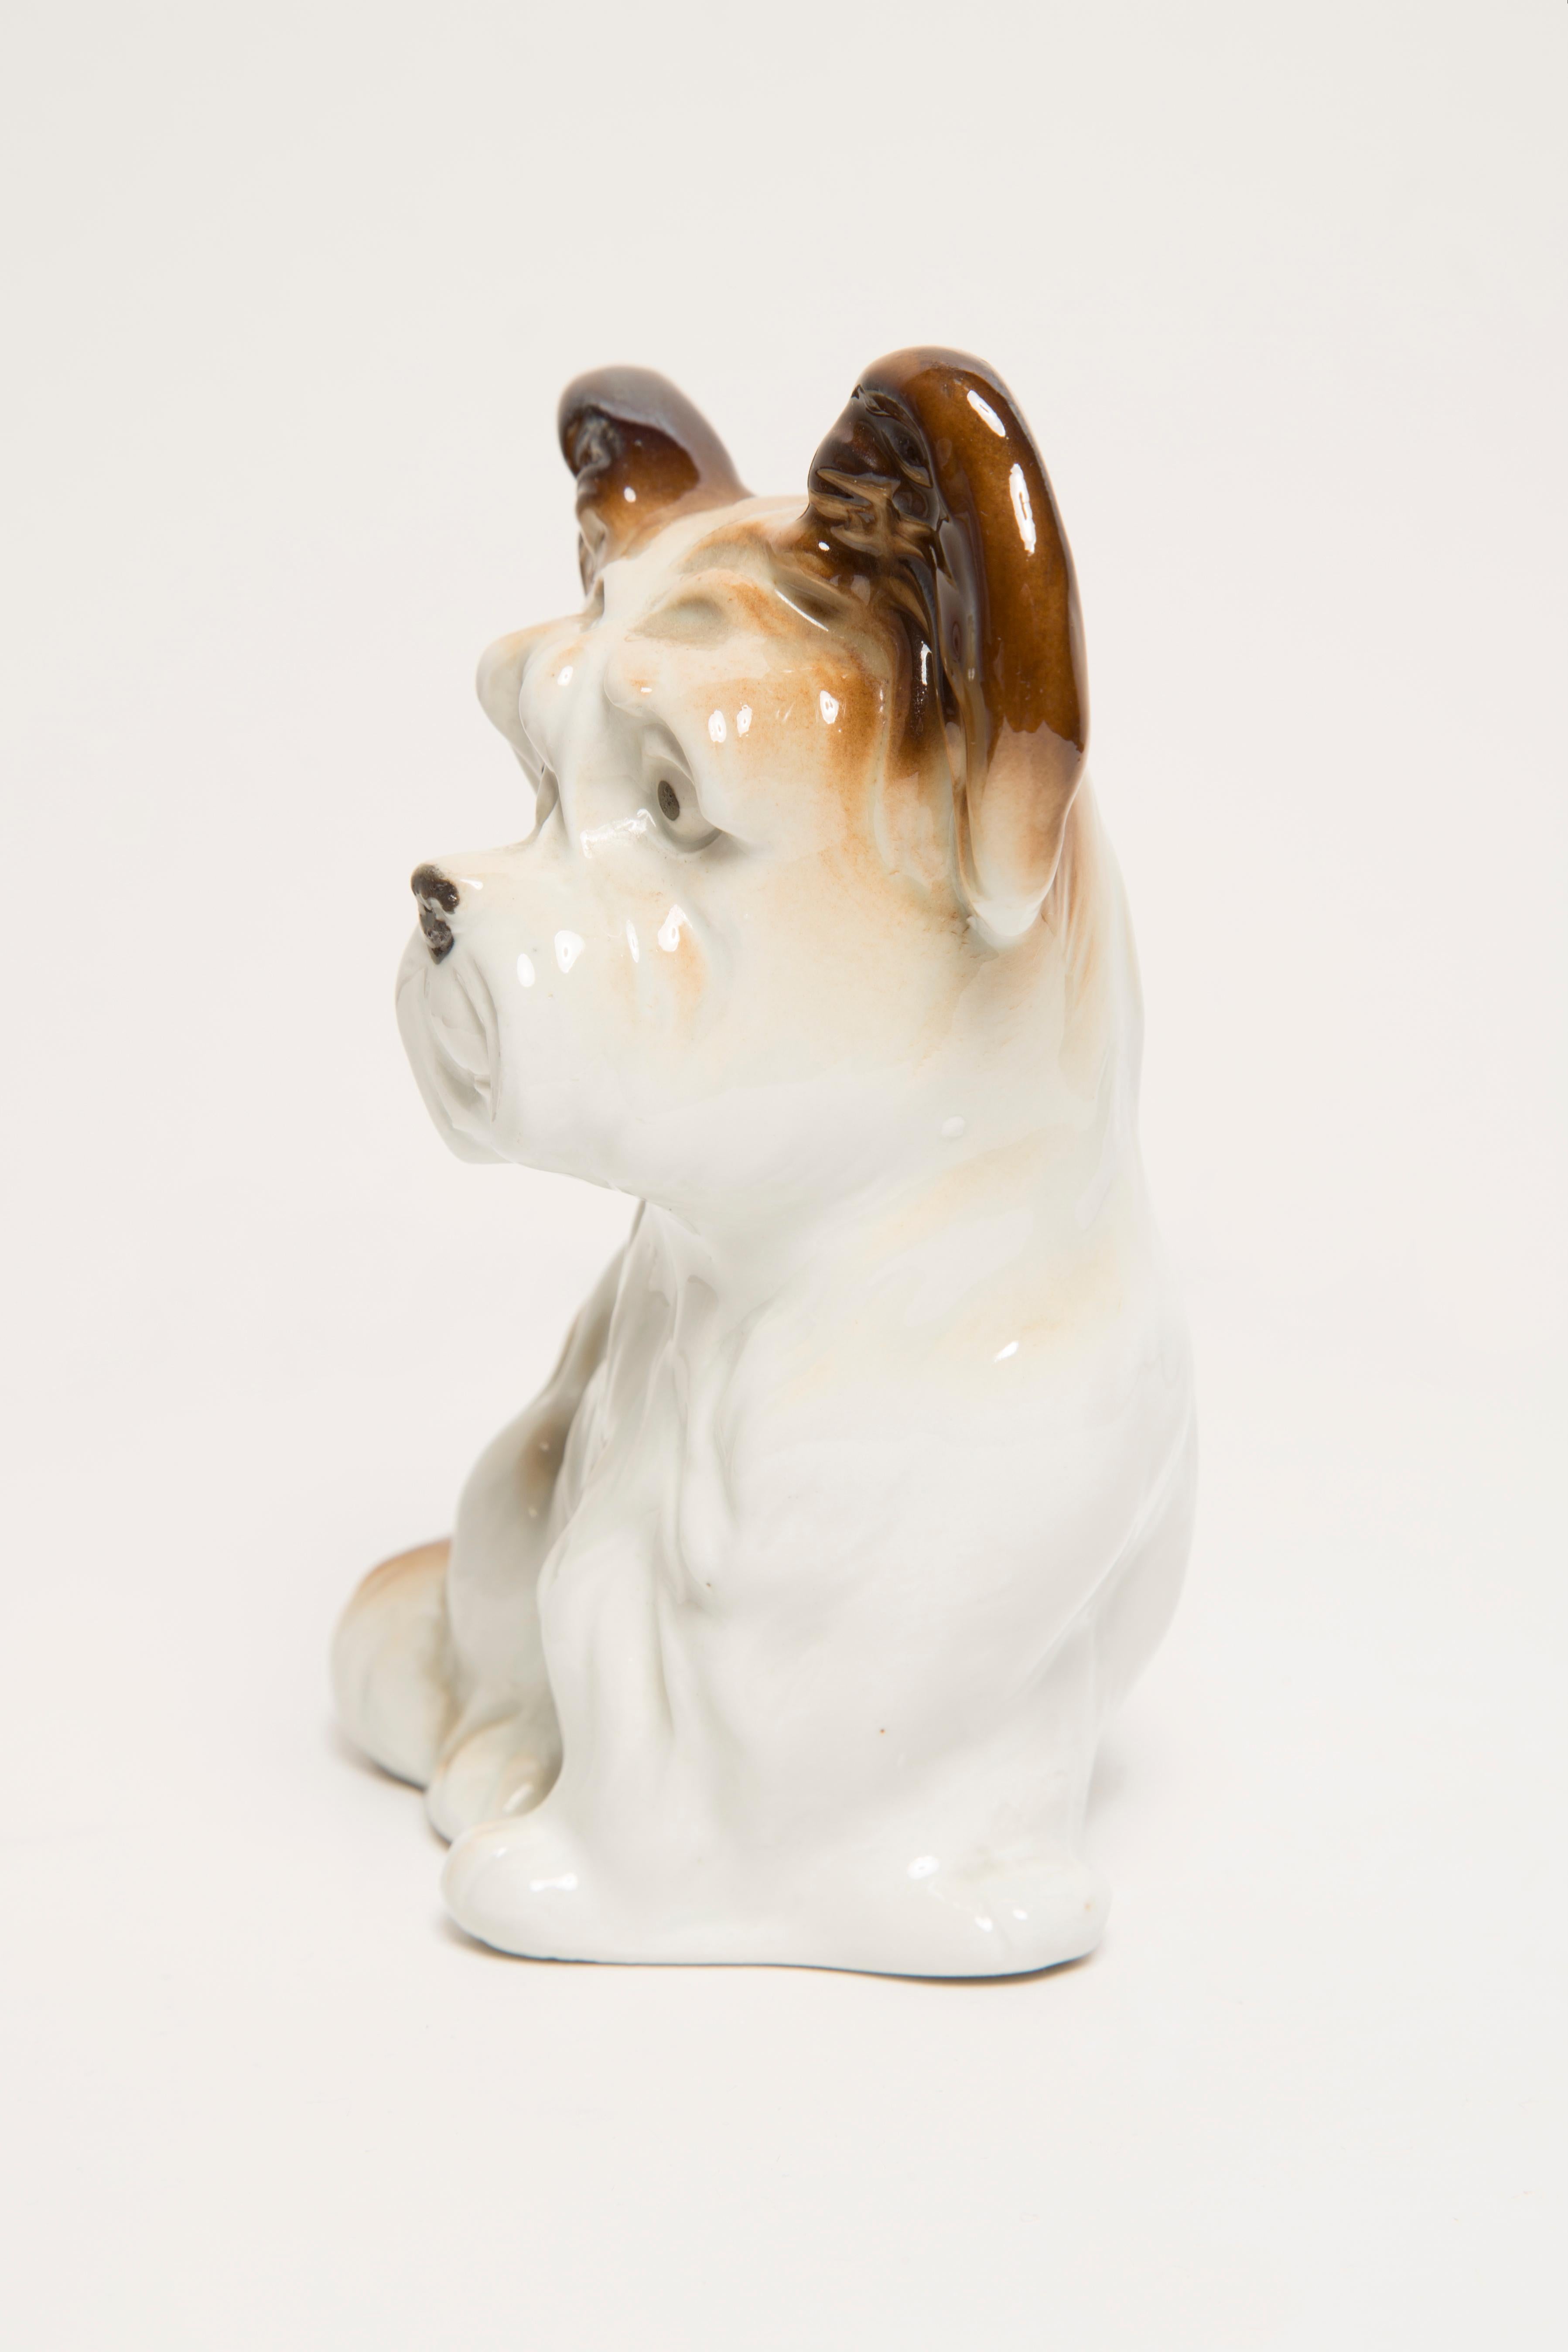 20th Century Midcentury Small White Terrier Dog Sculpture, Italy, 1960s For Sale